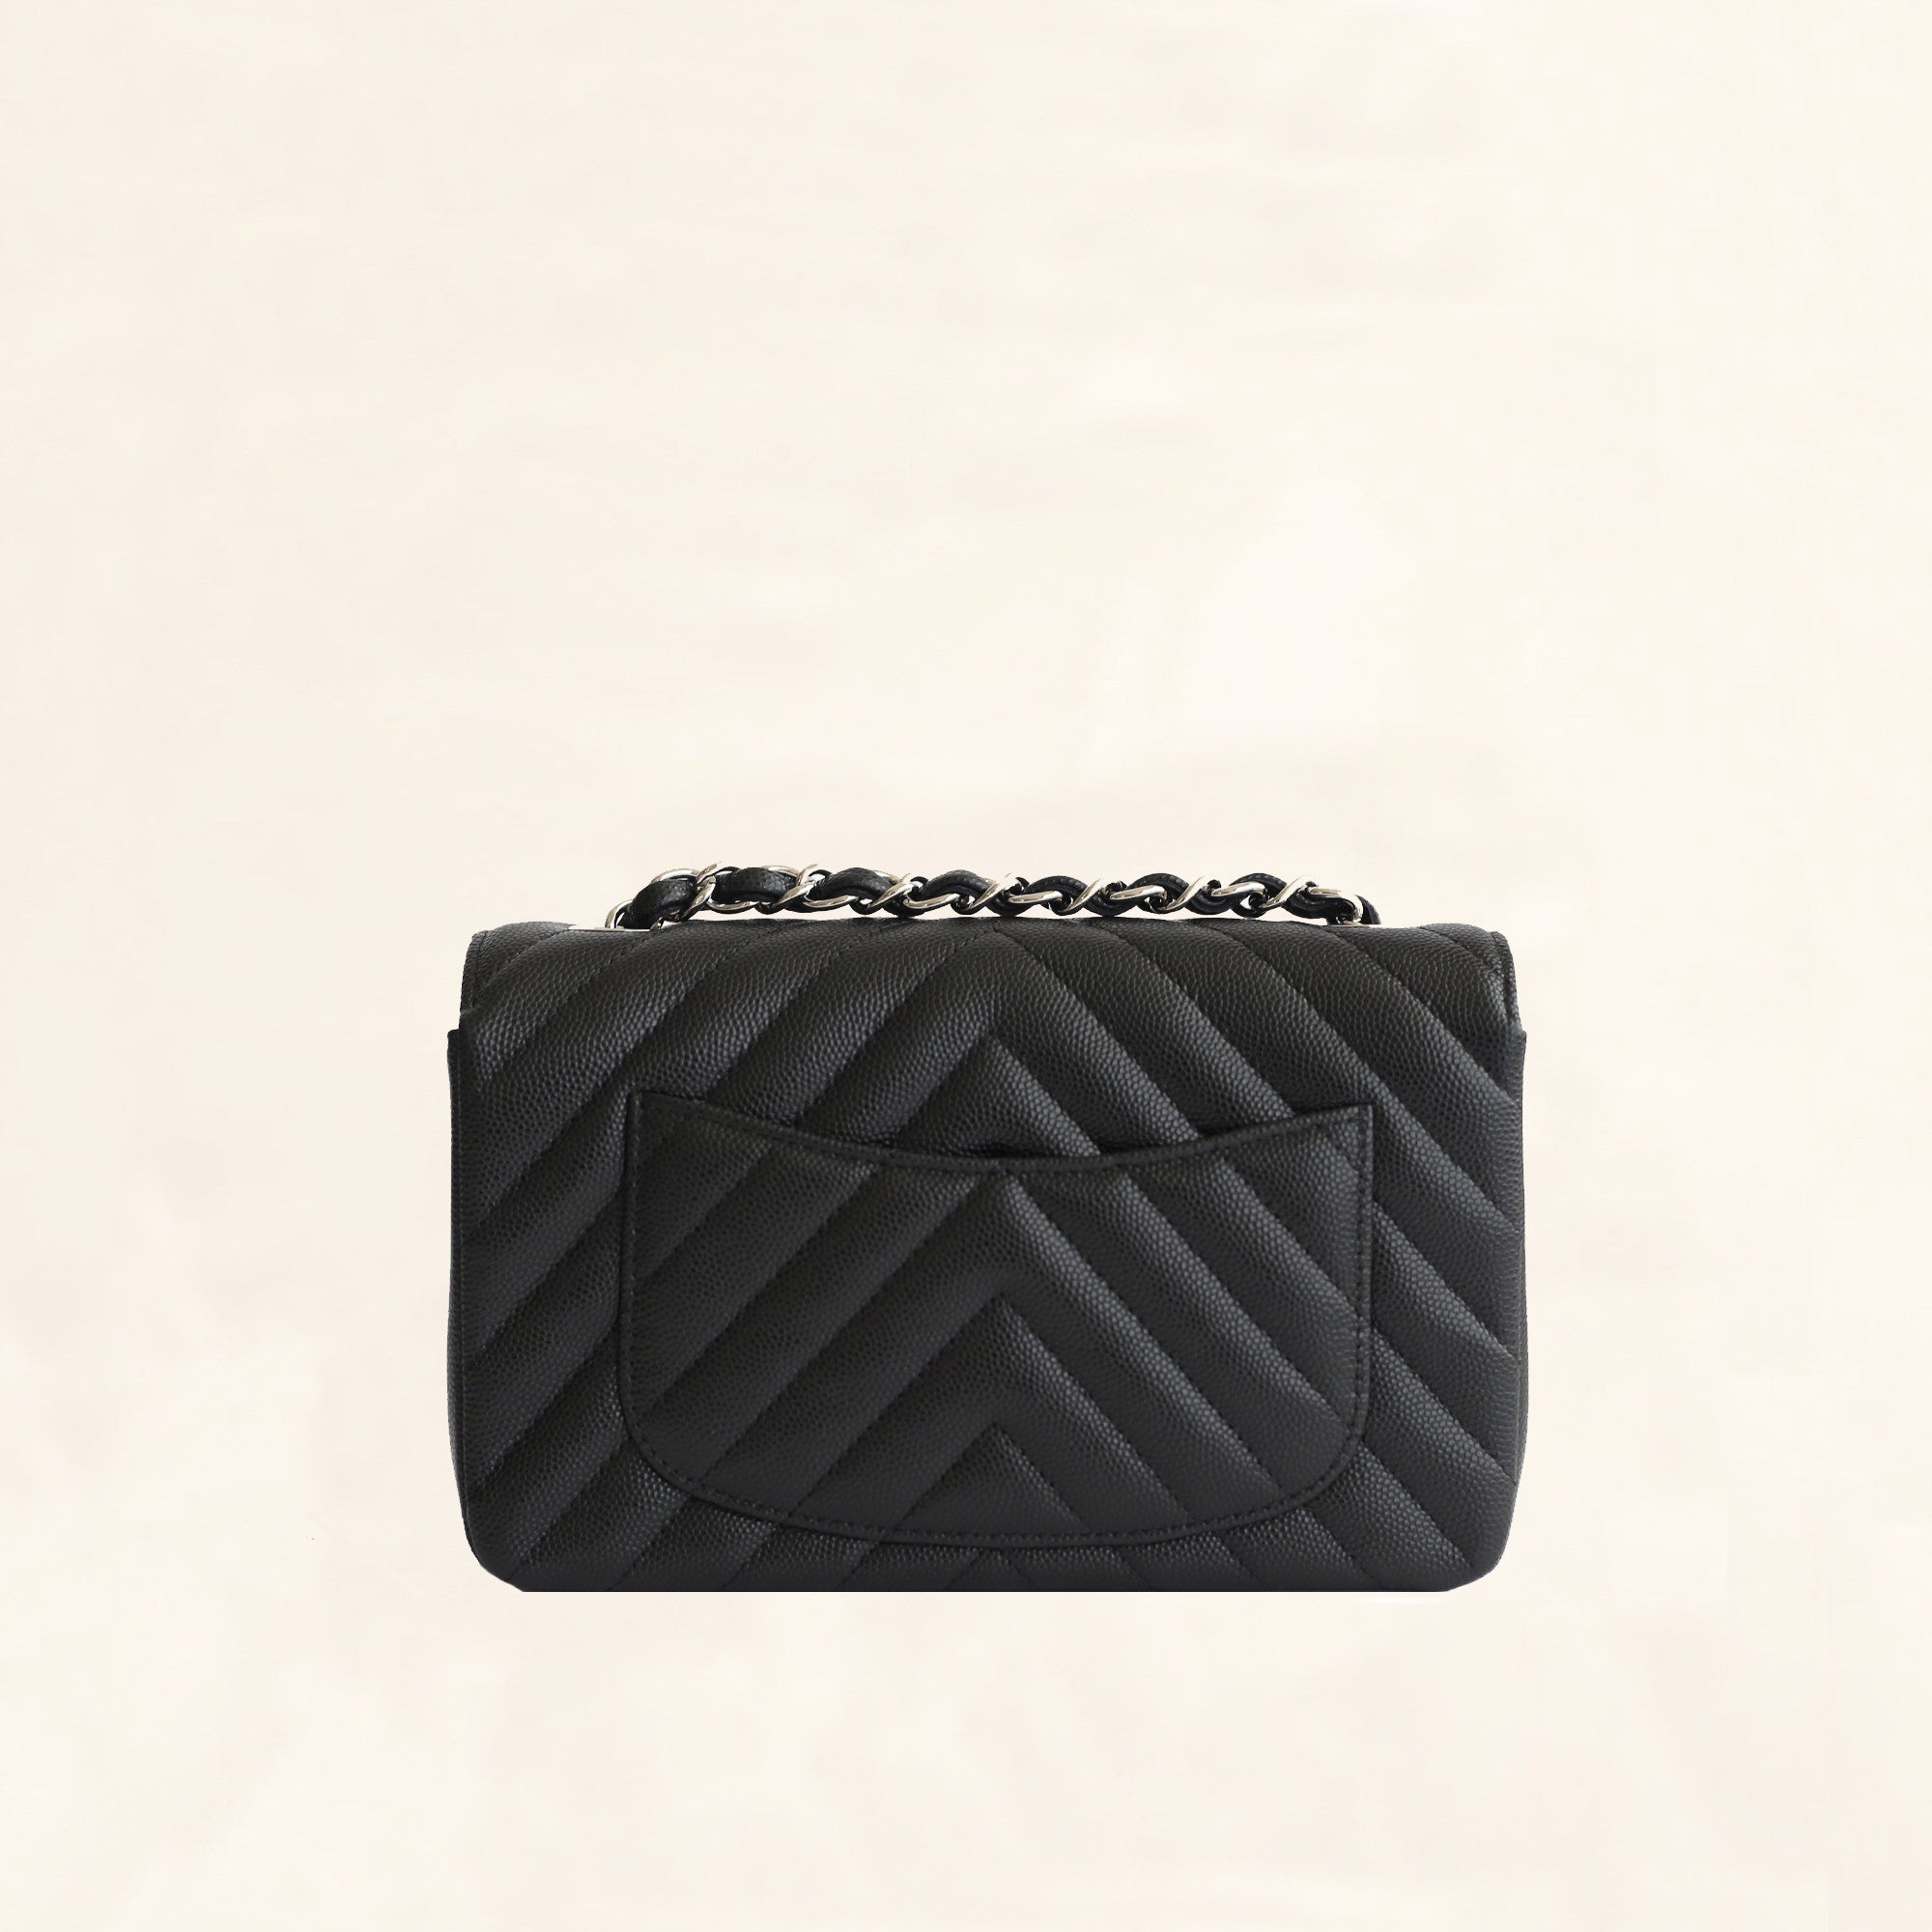 Chanel Mini Square Bag – LuxCollector Vintage